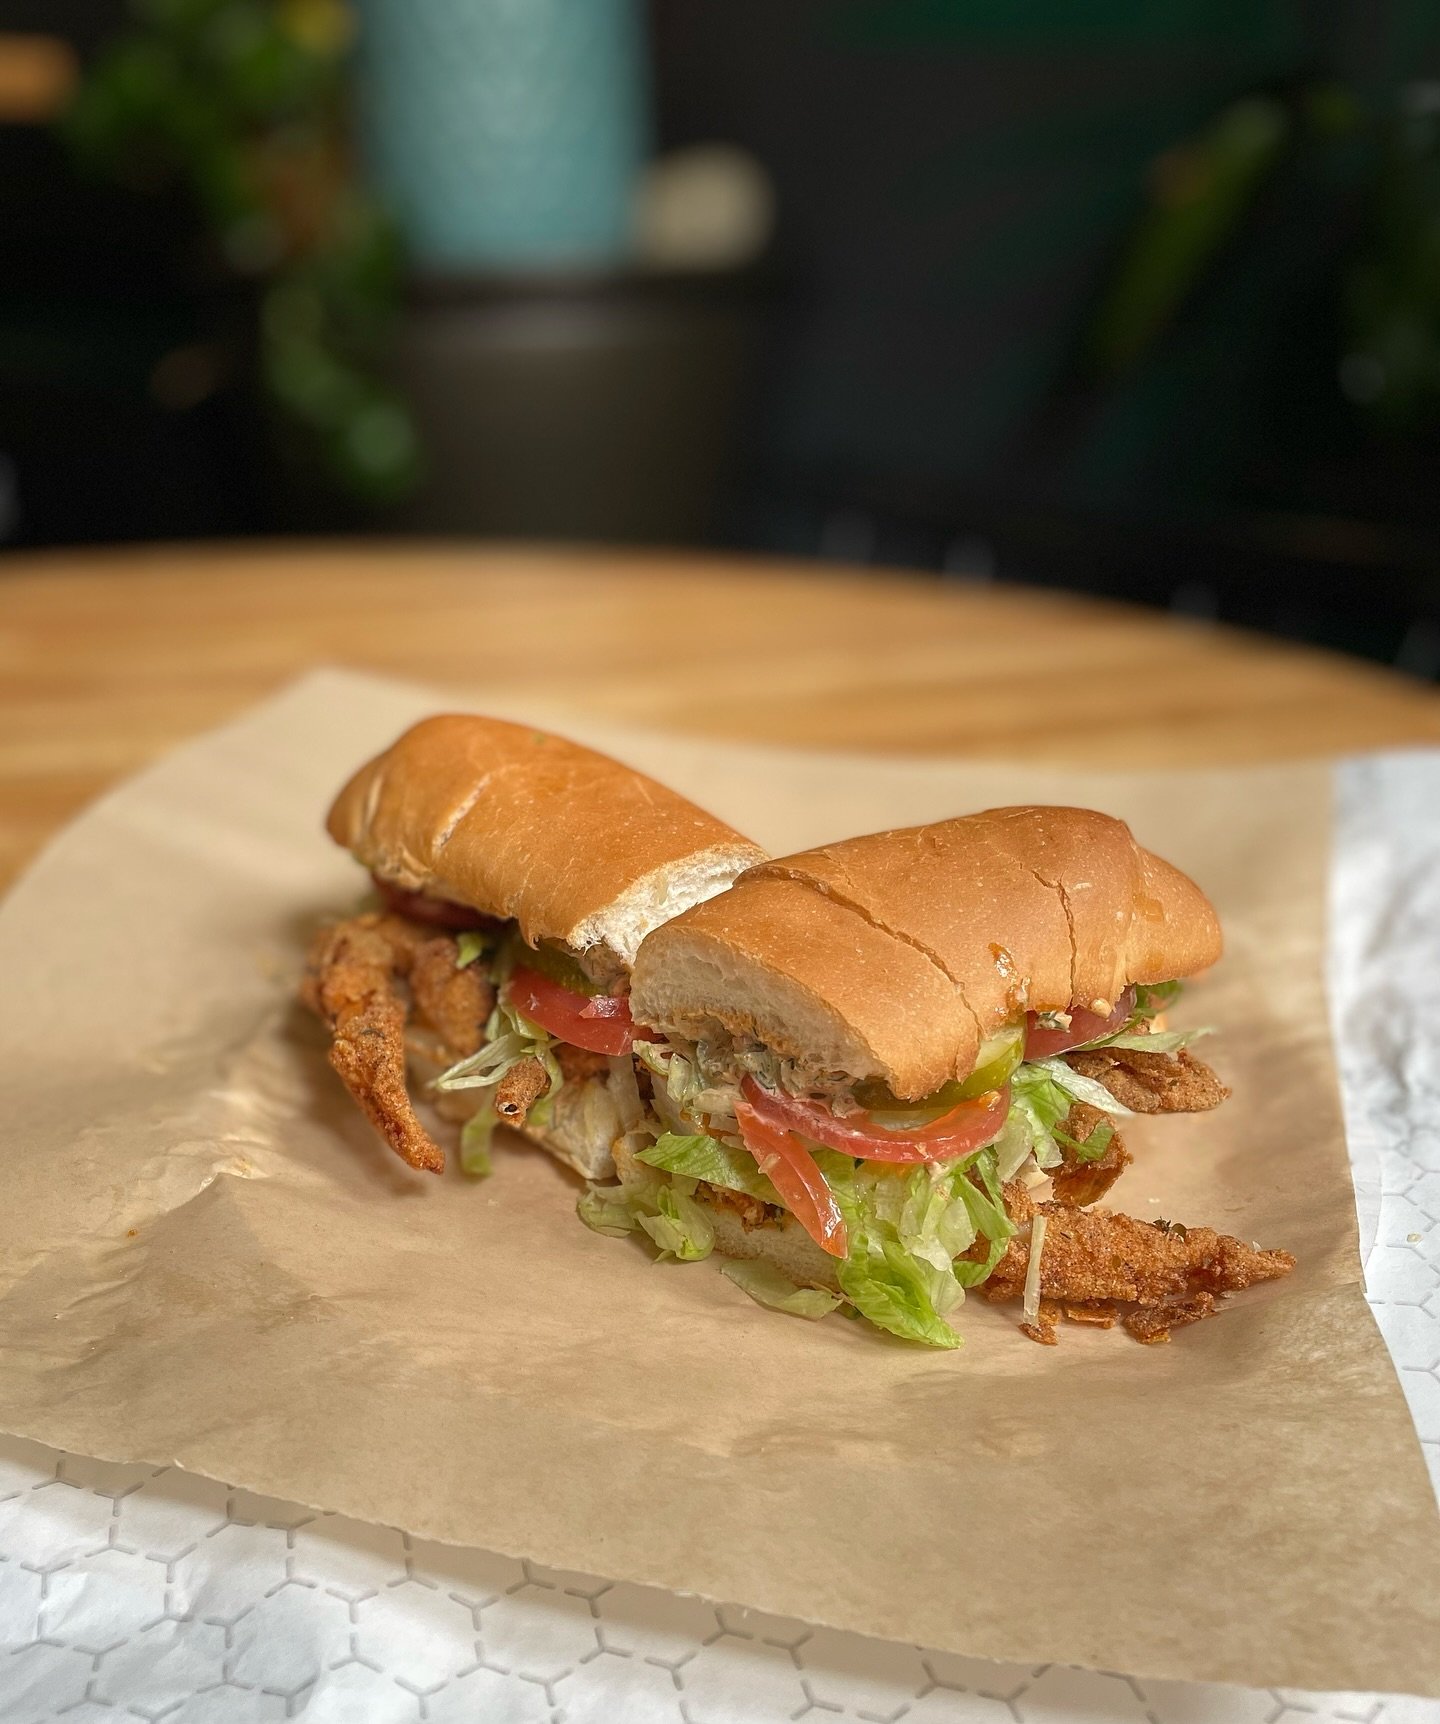 It&rsquo;s Soft Shell season, baby! Today only - come grab 2️⃣ Blackened Soft Shell Crab Po&rsquo; Boys for $29 🦀

They&rsquo;ll be on the menu for the rest of the week for $24 each, jump on this deal while you can 💥

We&rsquo;ll be here until 9pm,